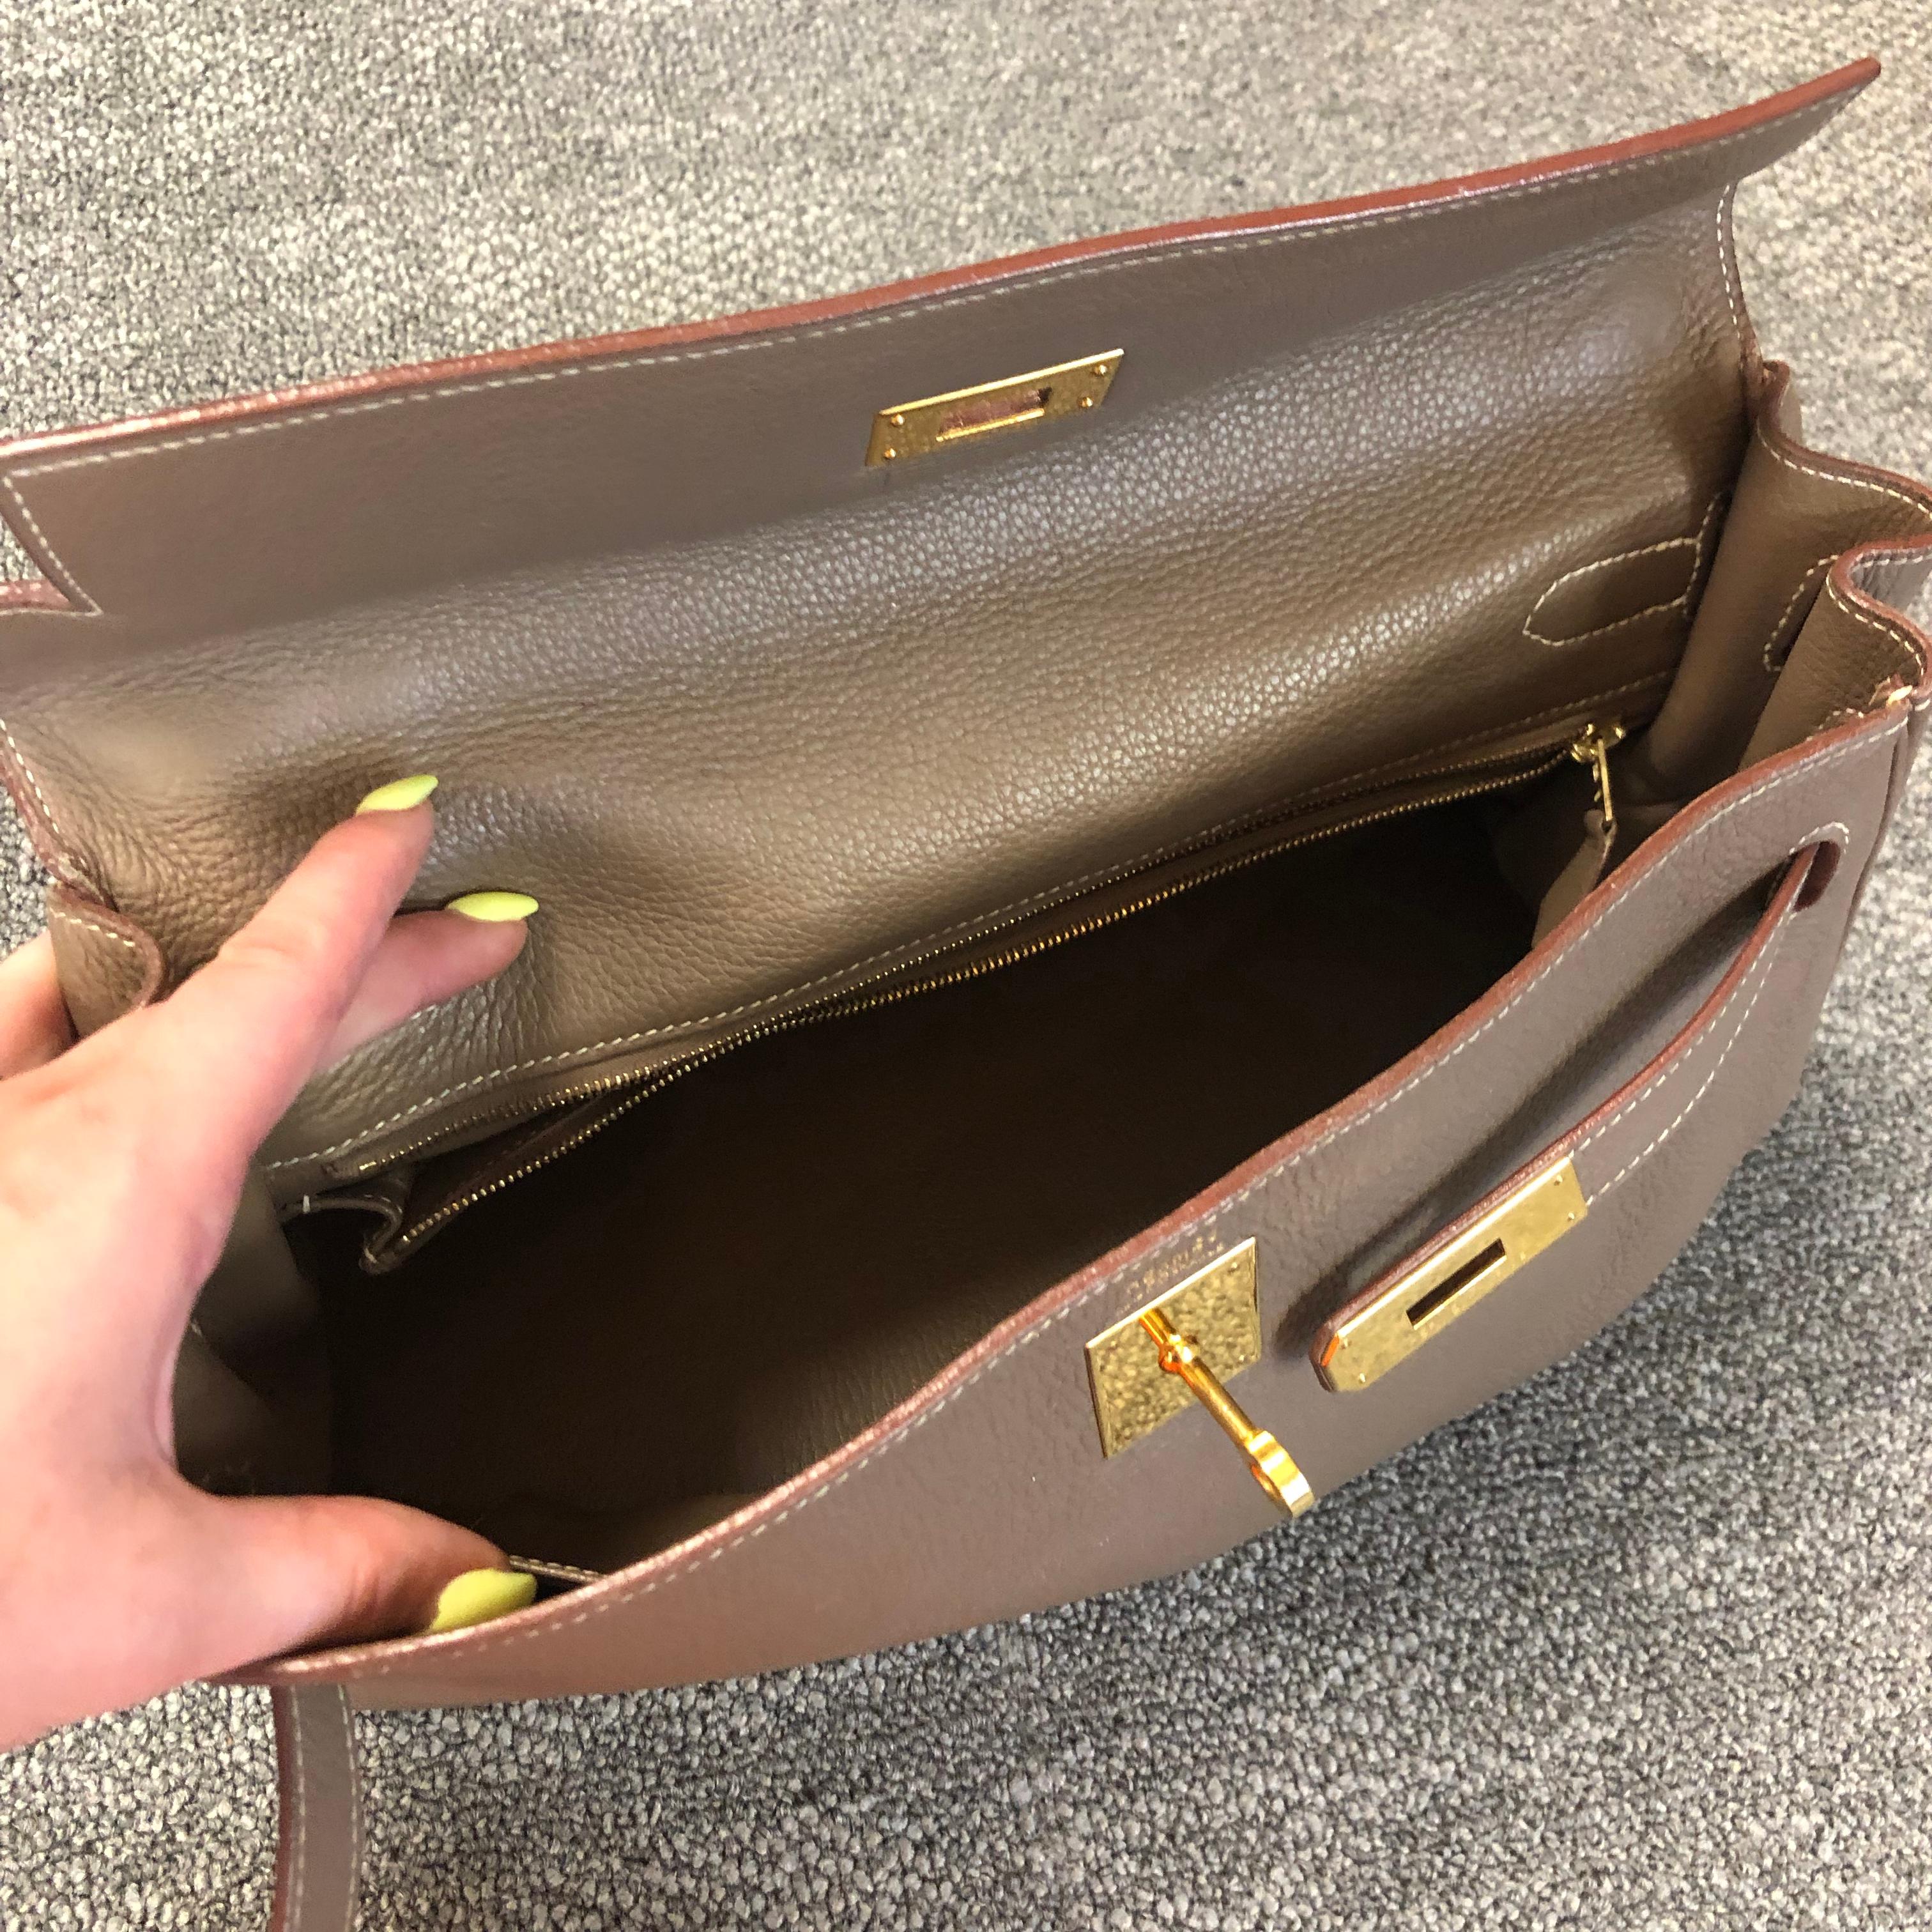 Hermès Taupe Epsom Leather Kelly Sellier 32 Bag Excellent Condition ...